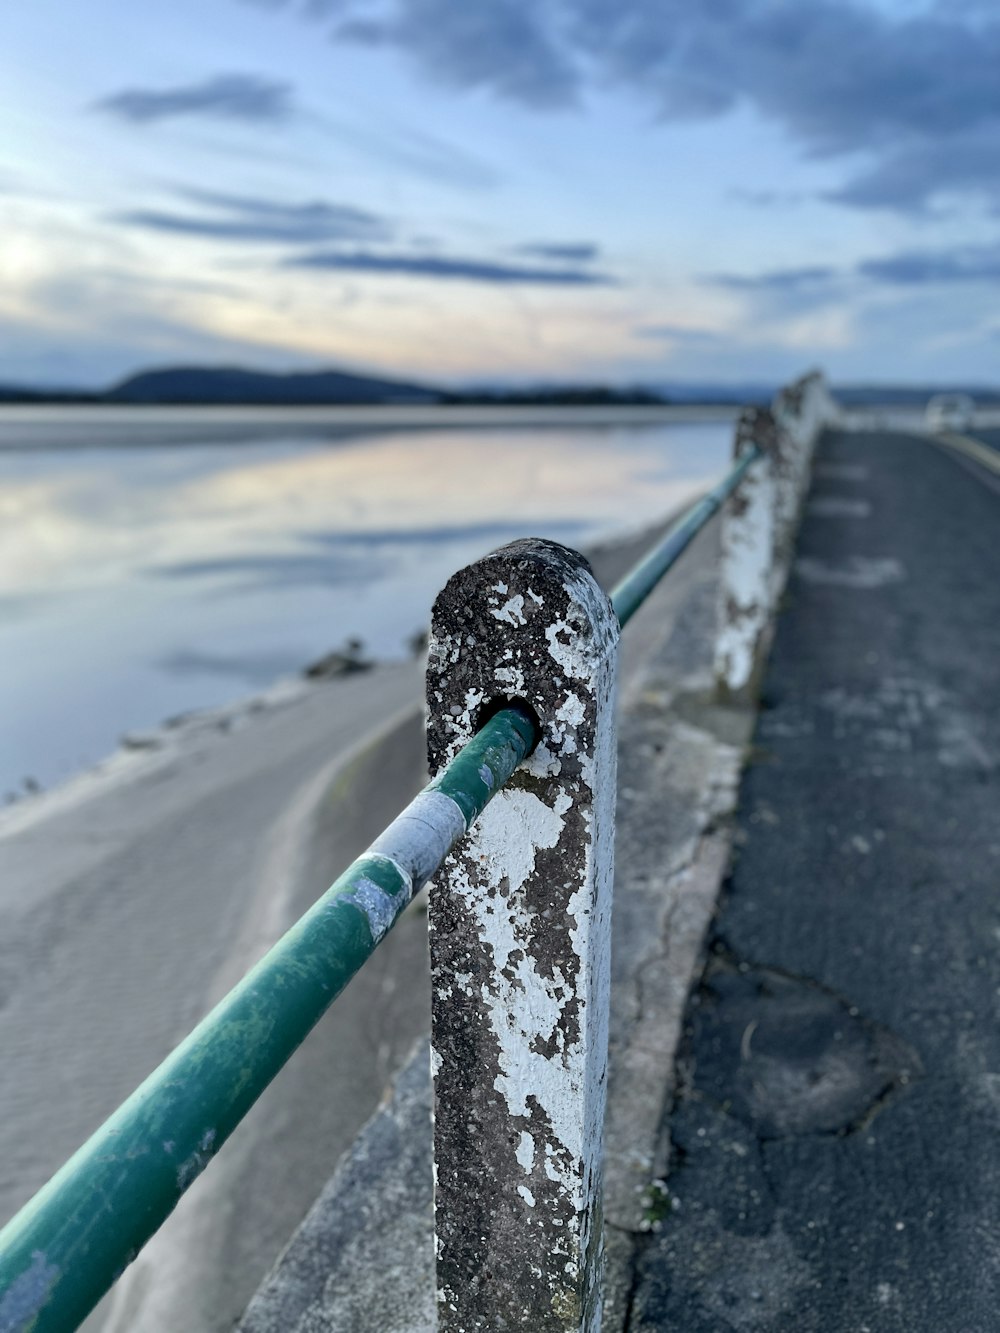 a metal fence near a body of water